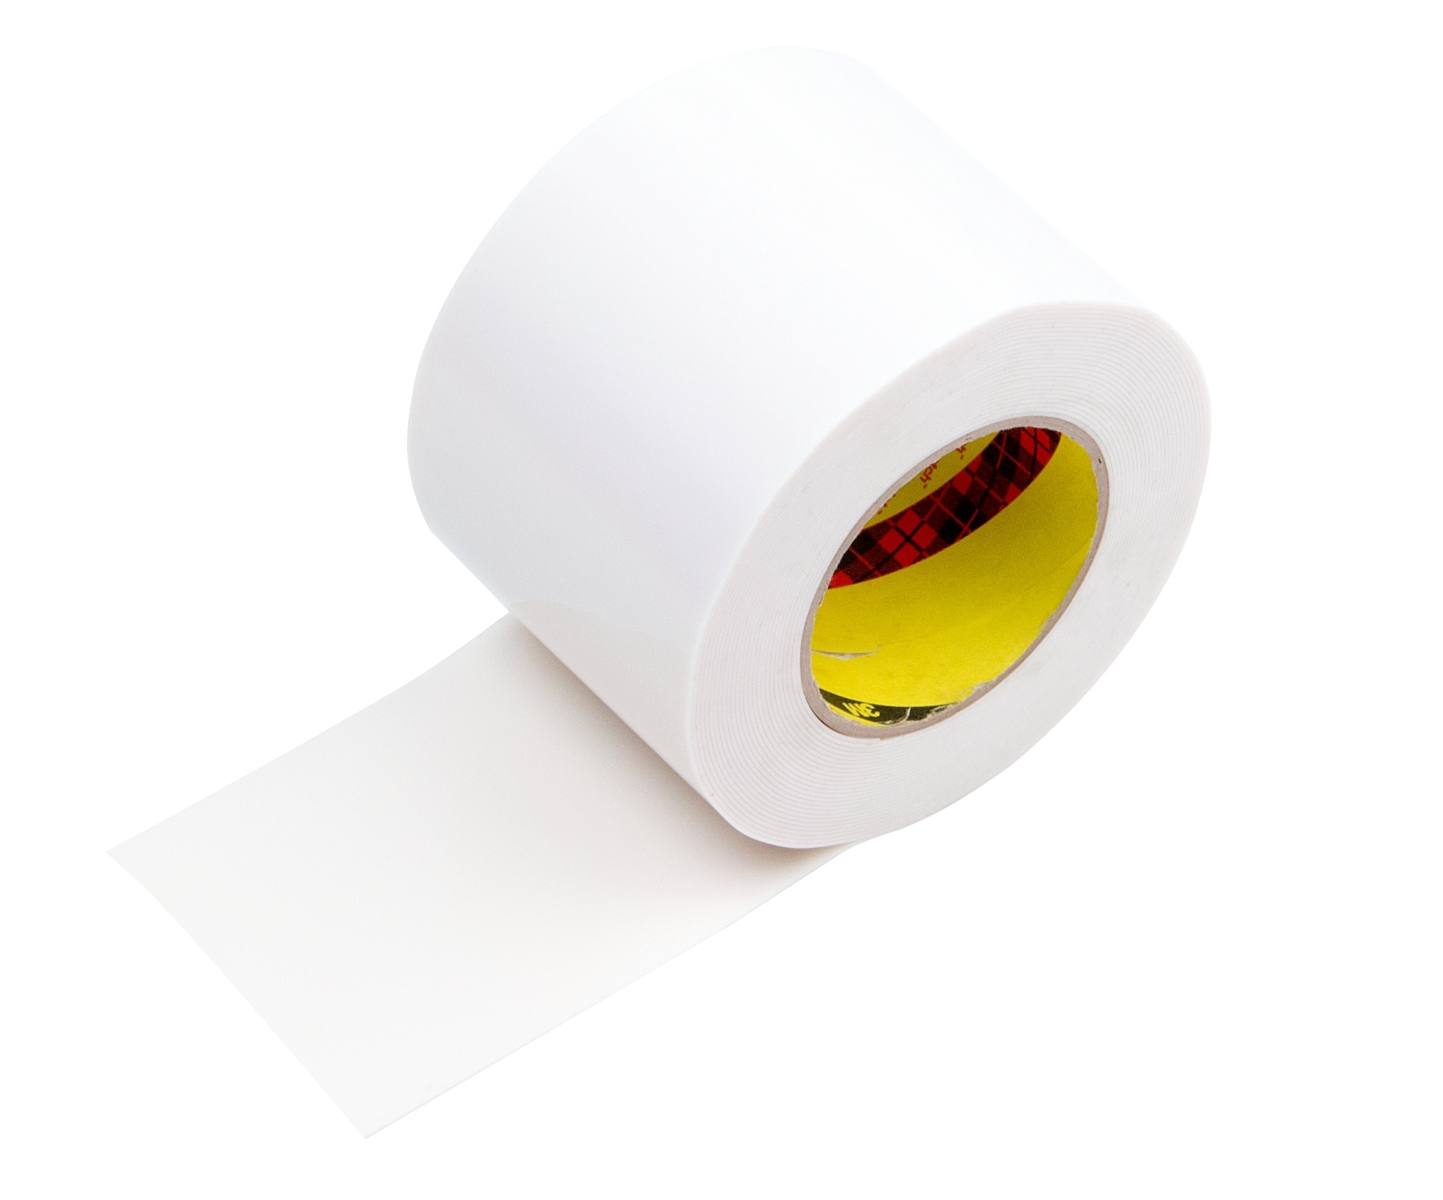 3M Thermally conductive adhesive film 8926-02 600 mm x 40 m, 0.200 mm